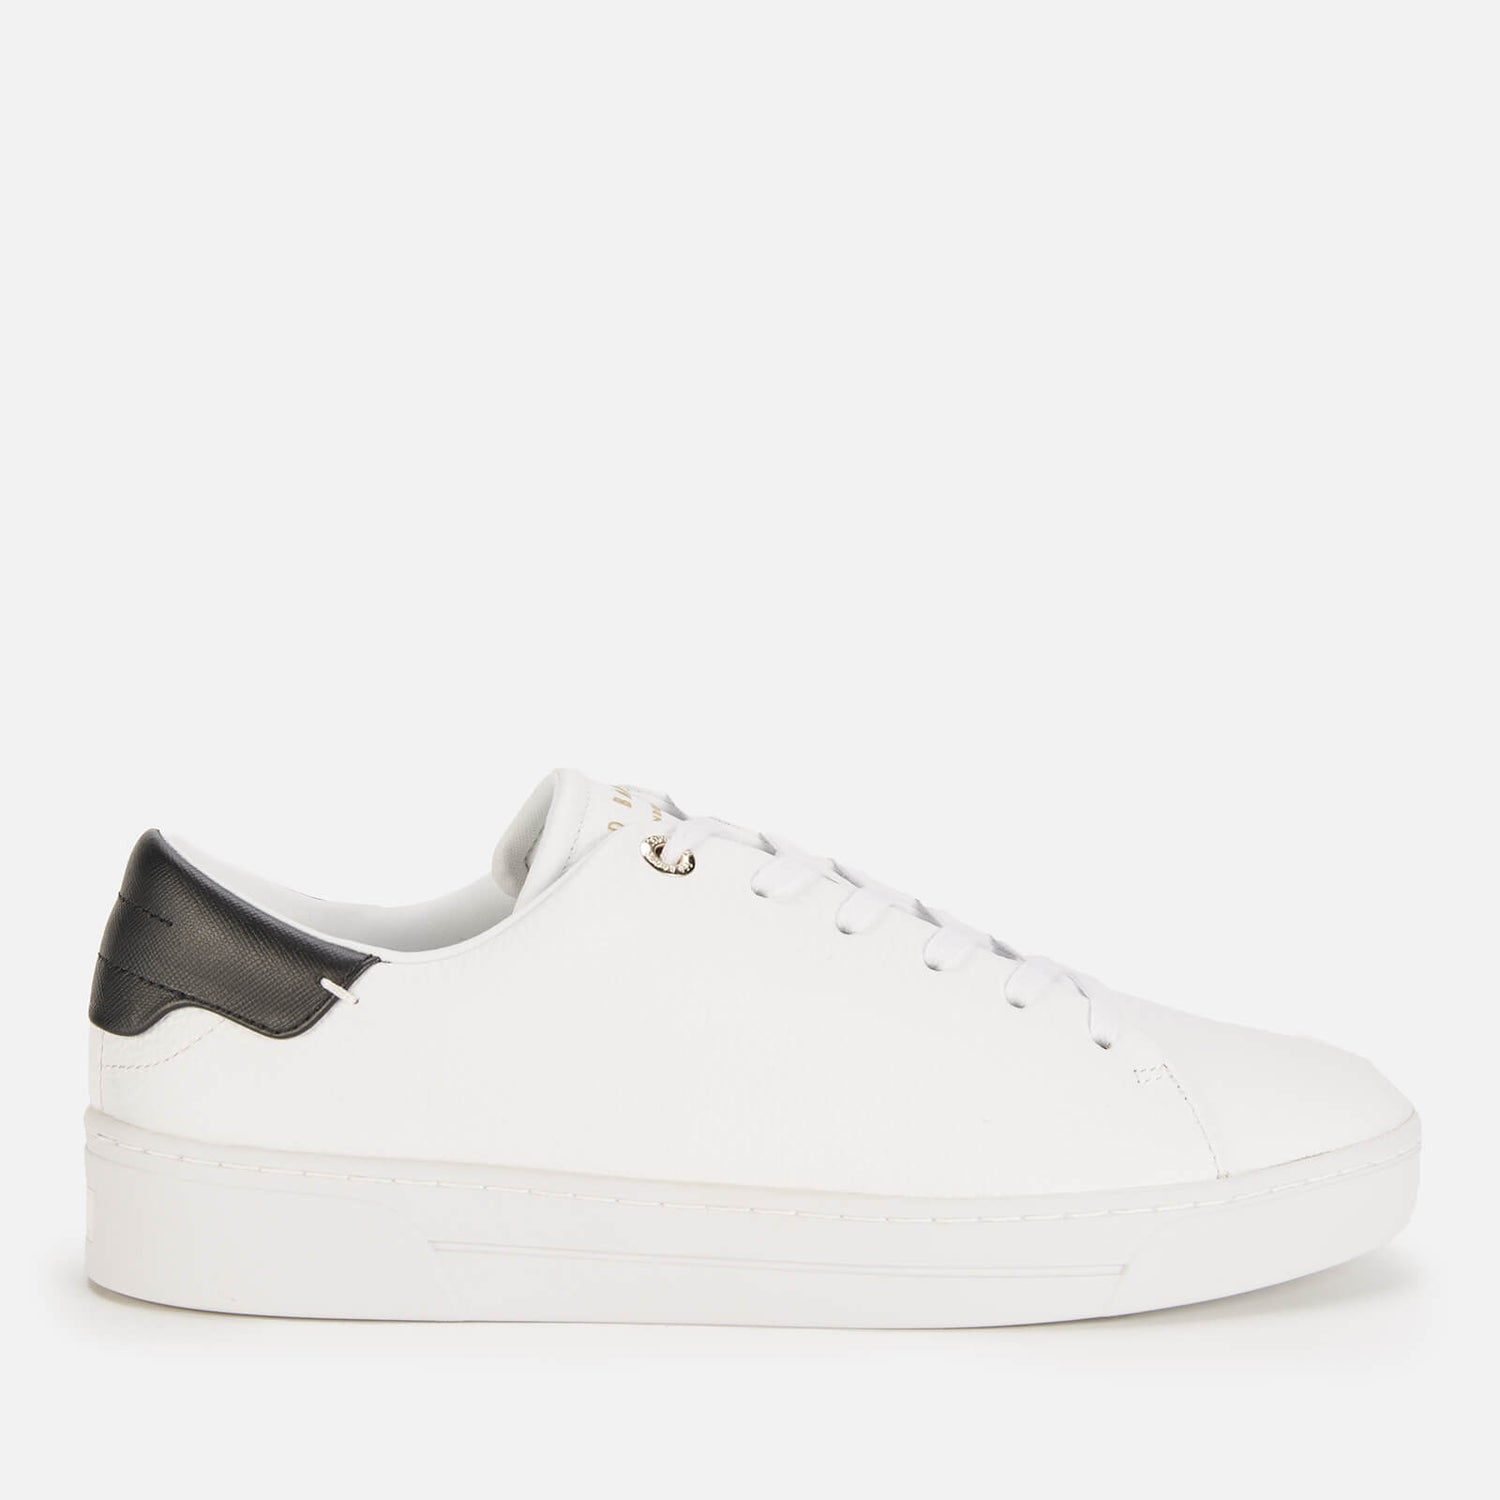 Ted Baker Women's Kimmii Leather Cupsole Trainers - White/Black - UK 3